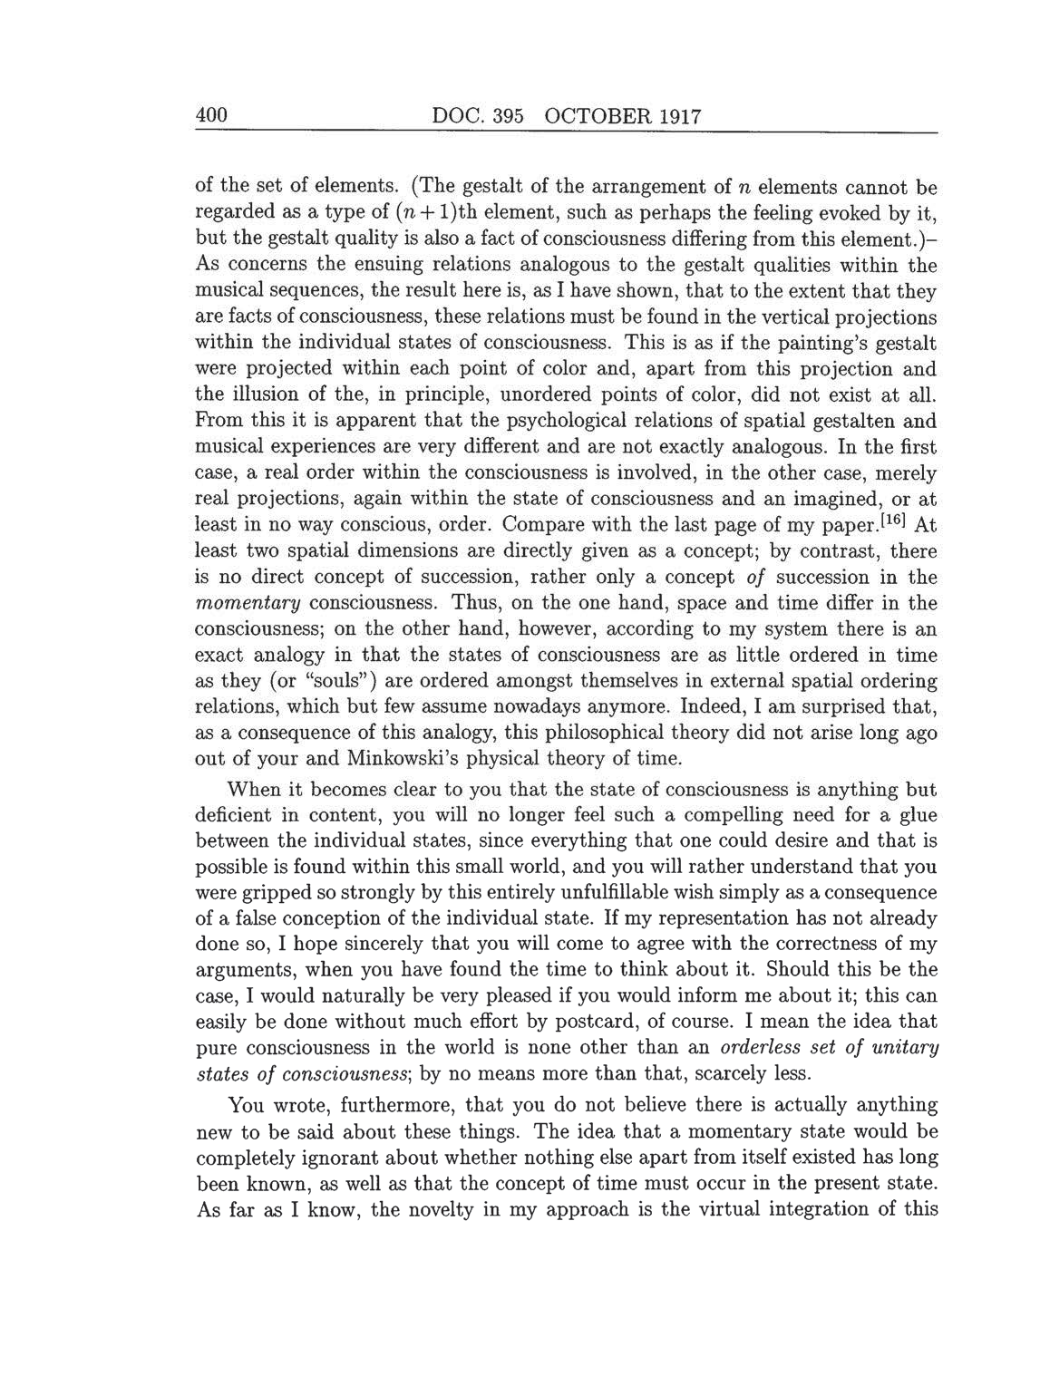 Volume 8: The Berlin Years: Correspondence, 1914-1918 (English translation supplement) page 400